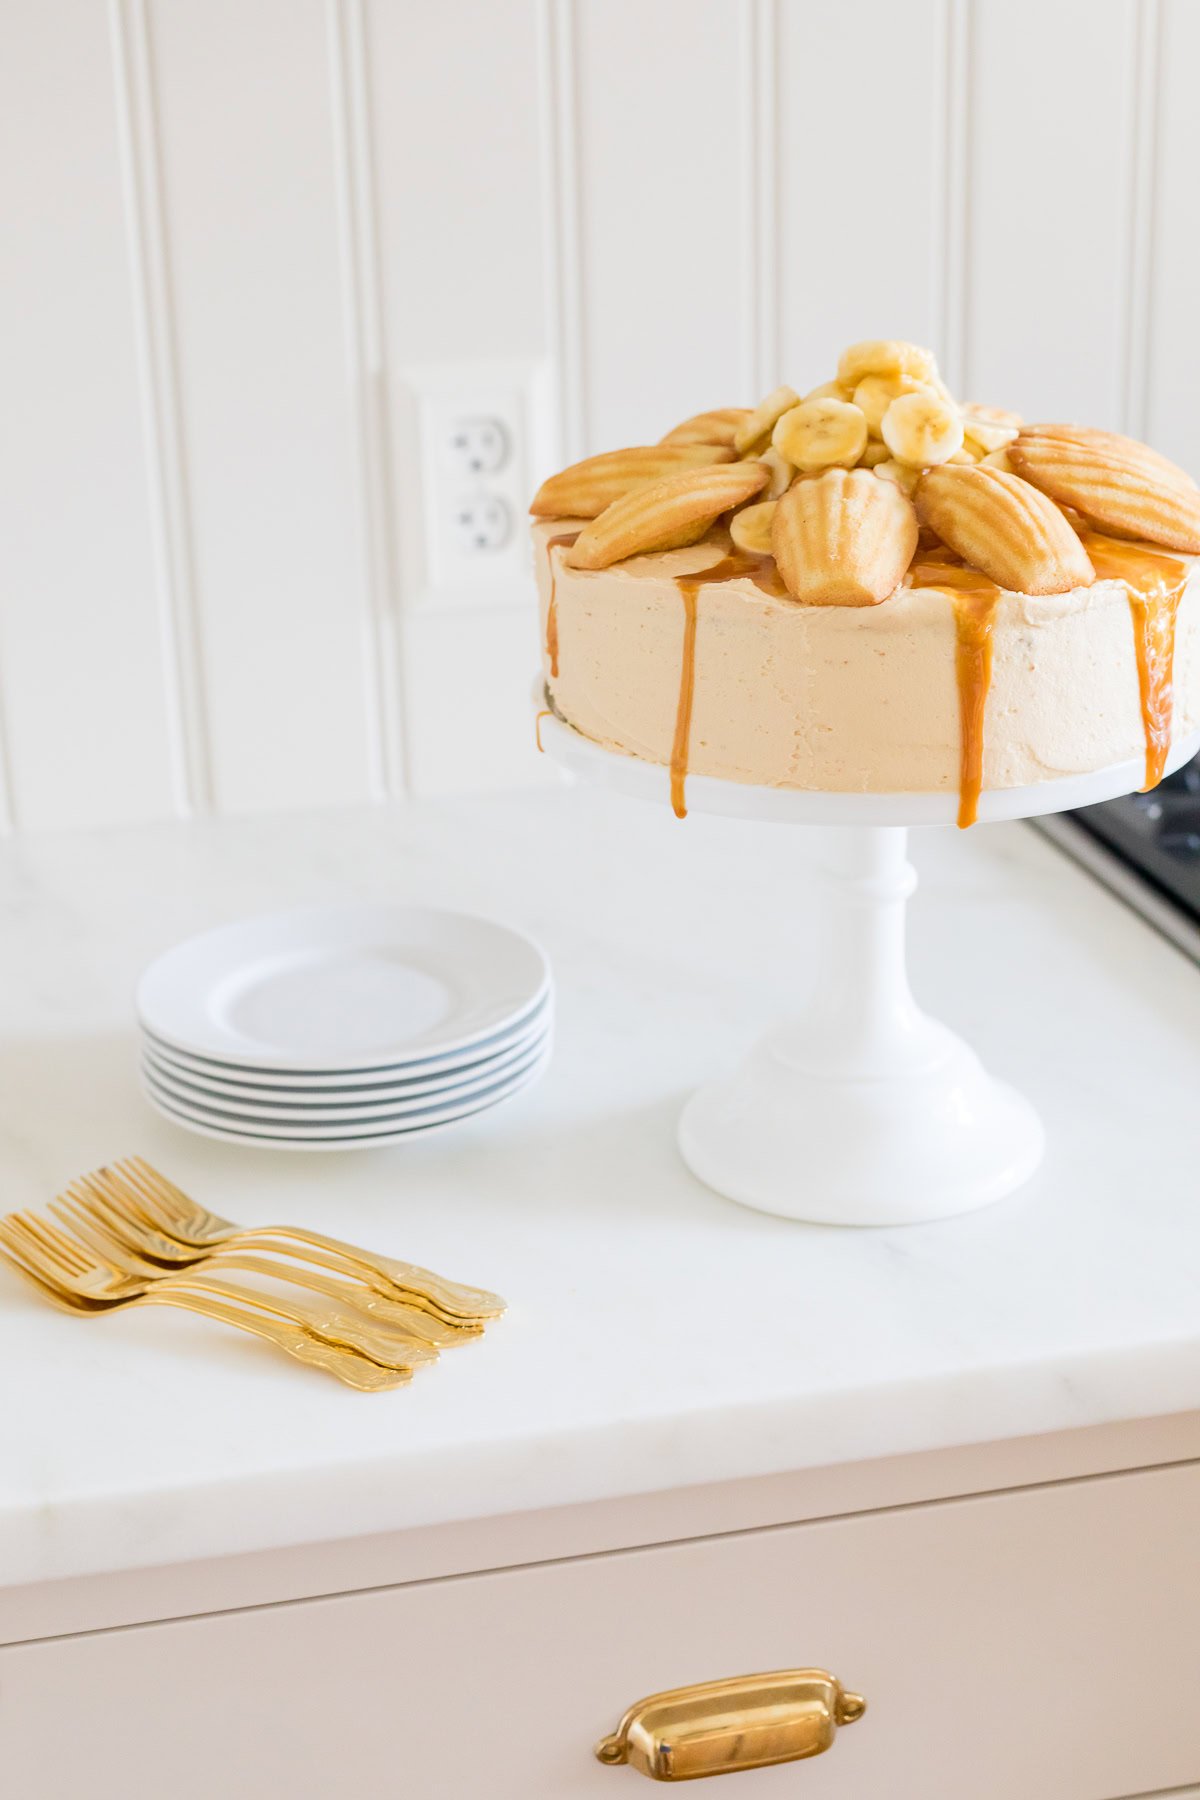 A cake with salted caramel frosting, topped with madeleine cookies and banana slices, is displayed on a white cake stand. Nearby, there are stacked plates and gold forks on a counter.